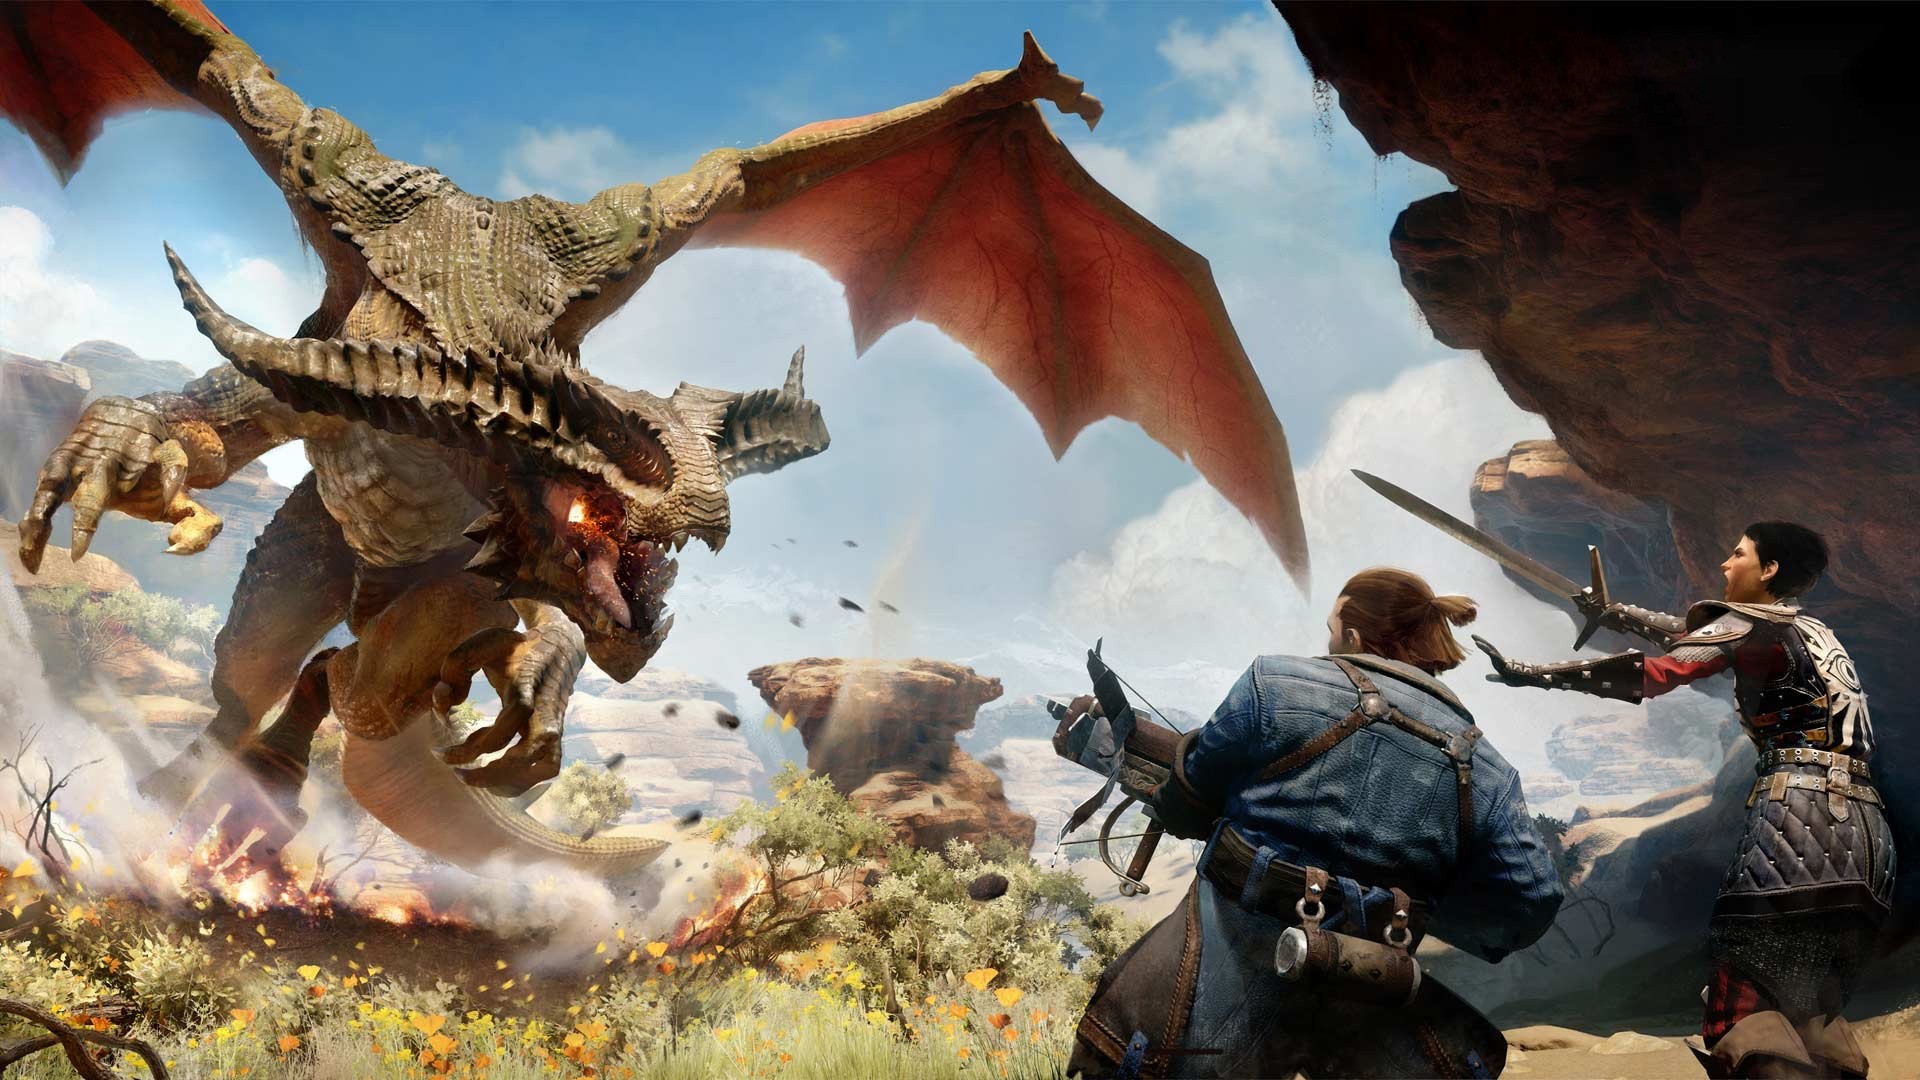 Best dragon games: Dragon Age Inquisition . Image shows two people fighting a dragon.